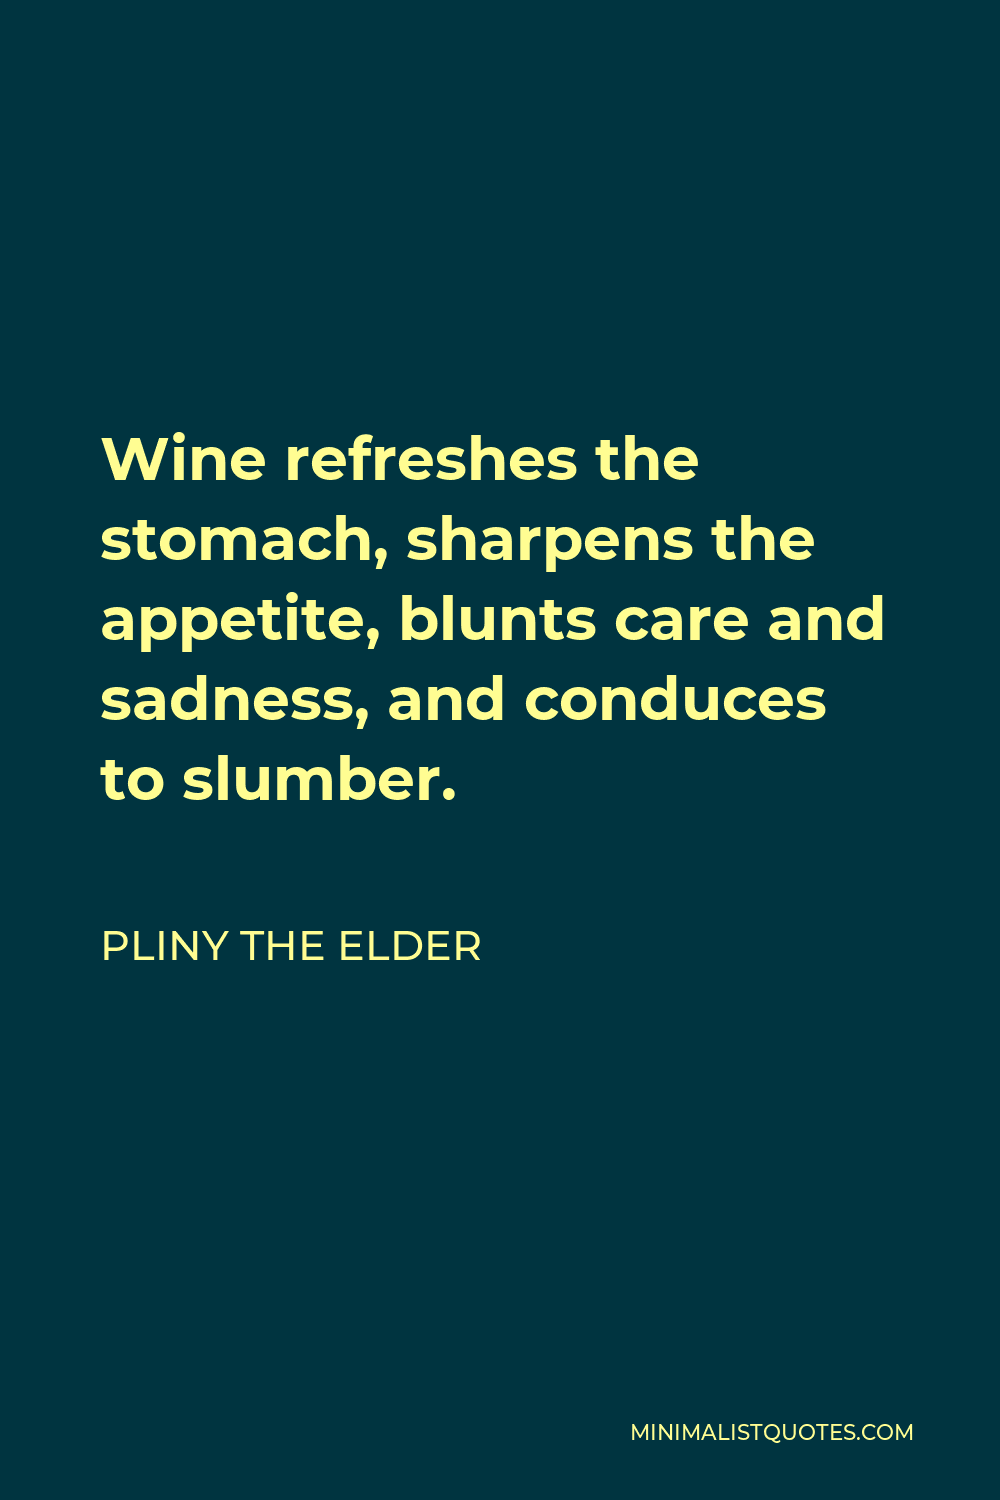 Pliny the Elder Quote - Wine refreshes the stomach, sharpens the appetite, blunts care and sadness, and conduces to slumber.